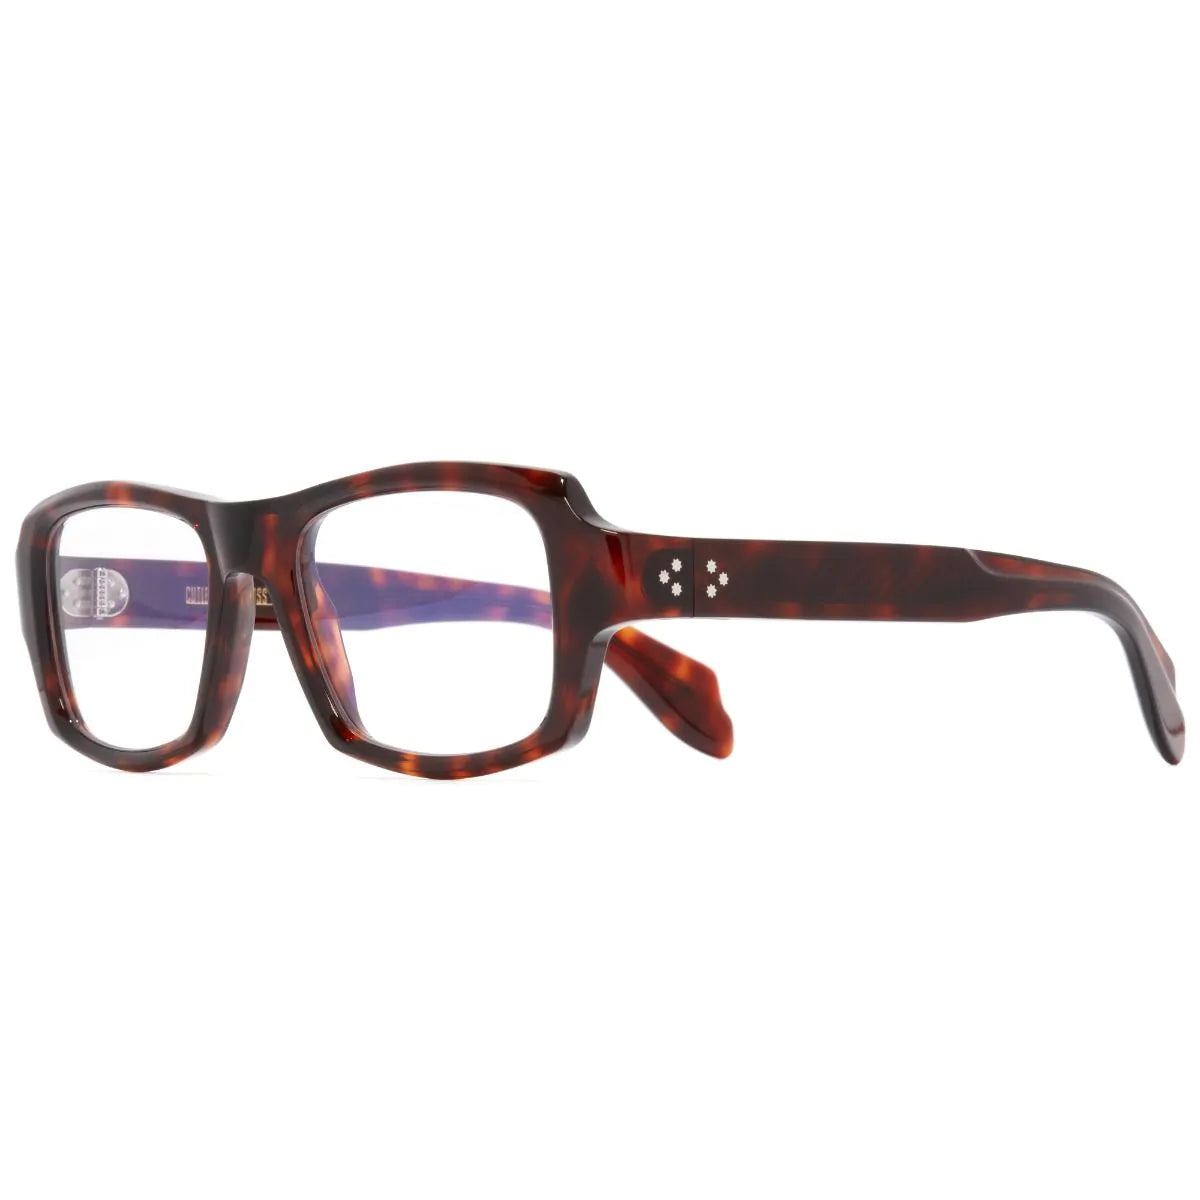 9894 Square Optical Glasses - Dark Turtle by Cutler and Gross